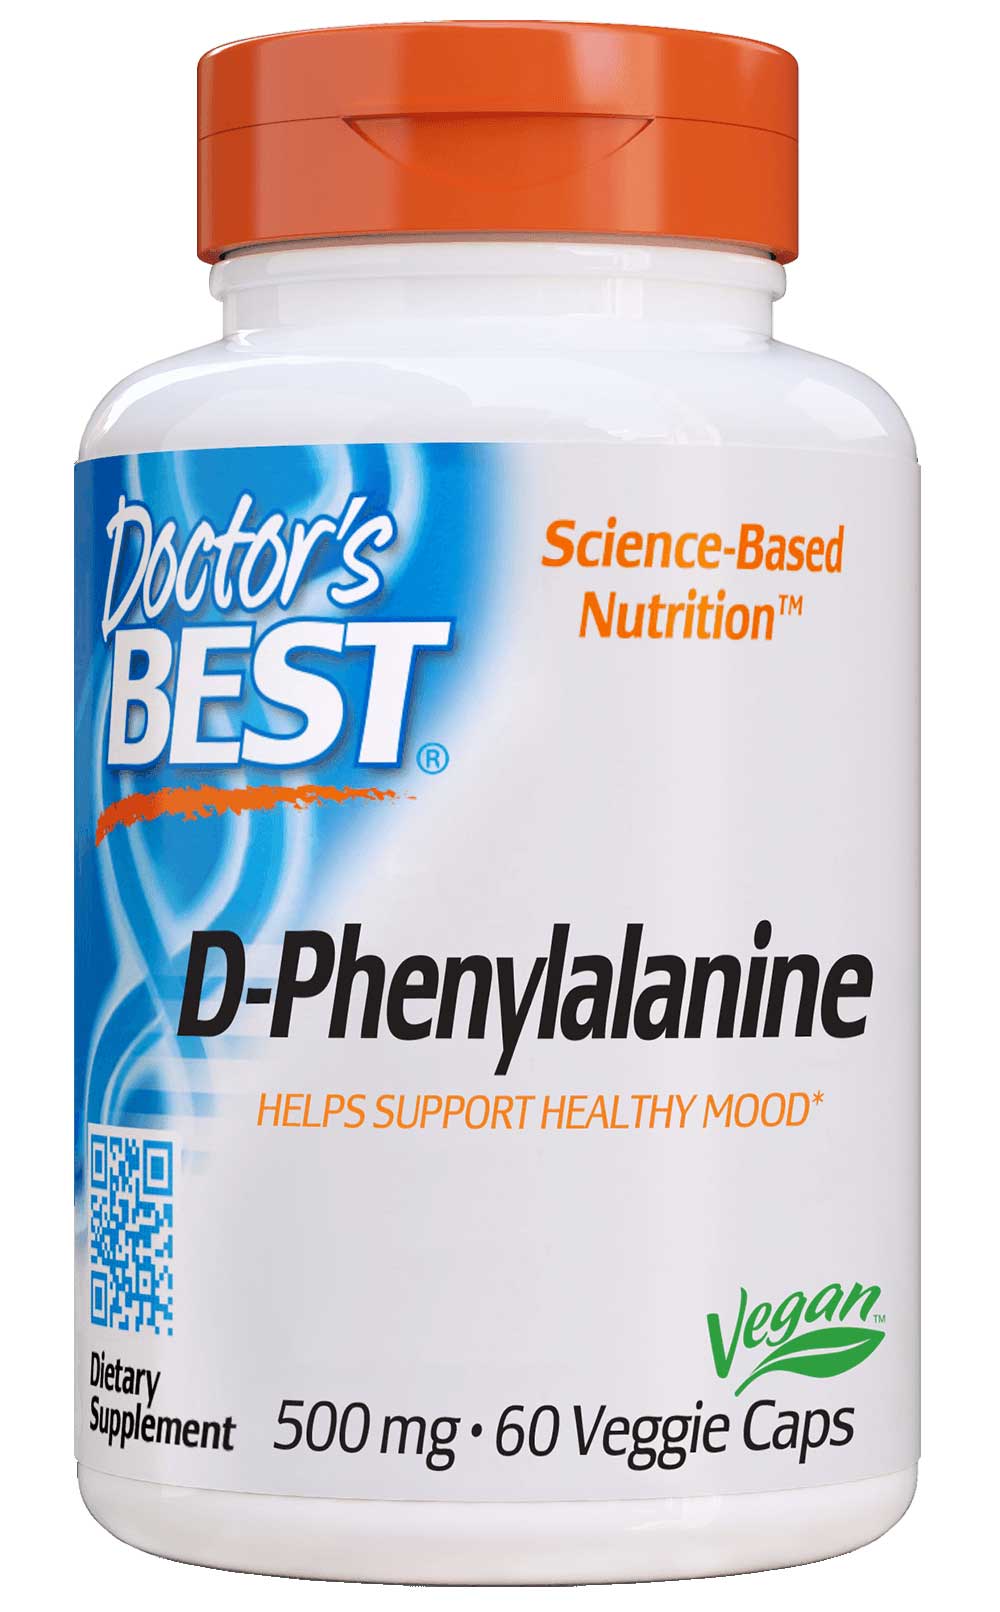 Doctor's Best D-Phenylalanine 500 mg